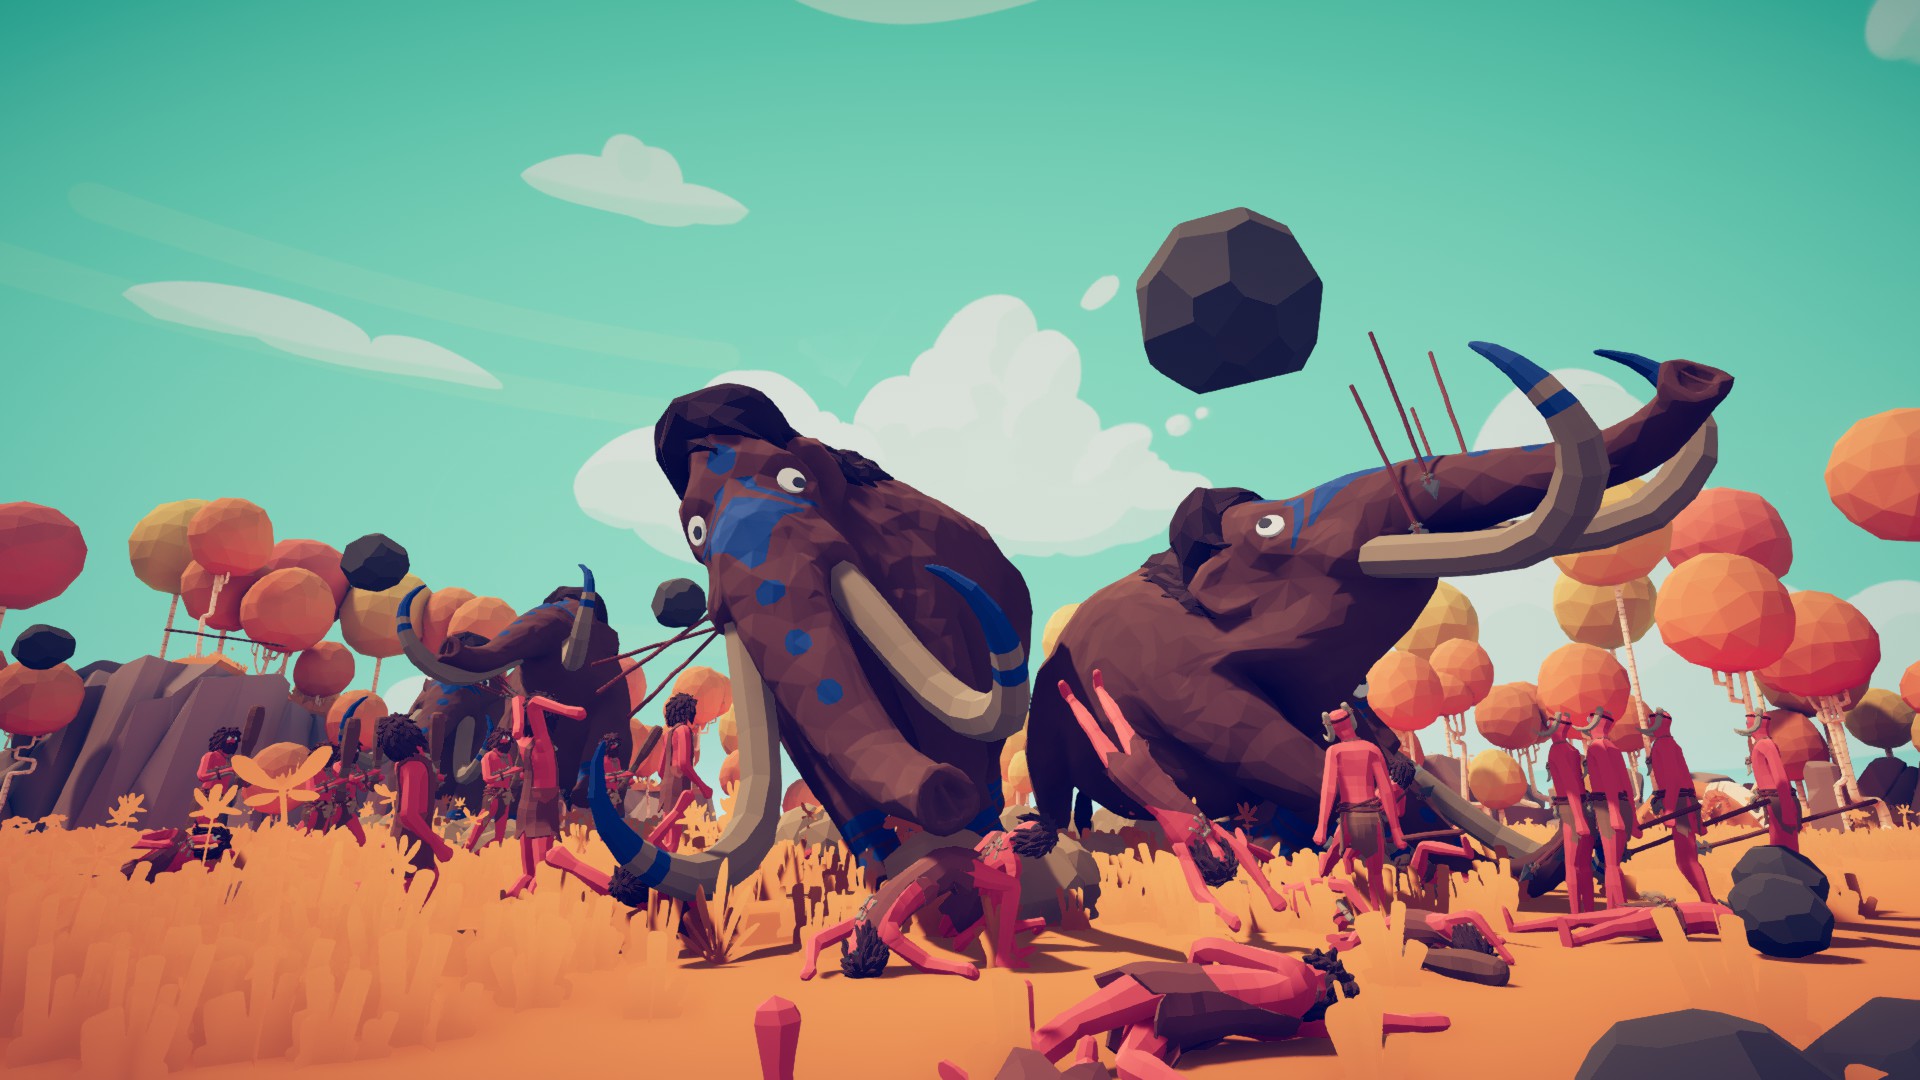 Save 40% on Totally Accurate Battle Simulator on Steam